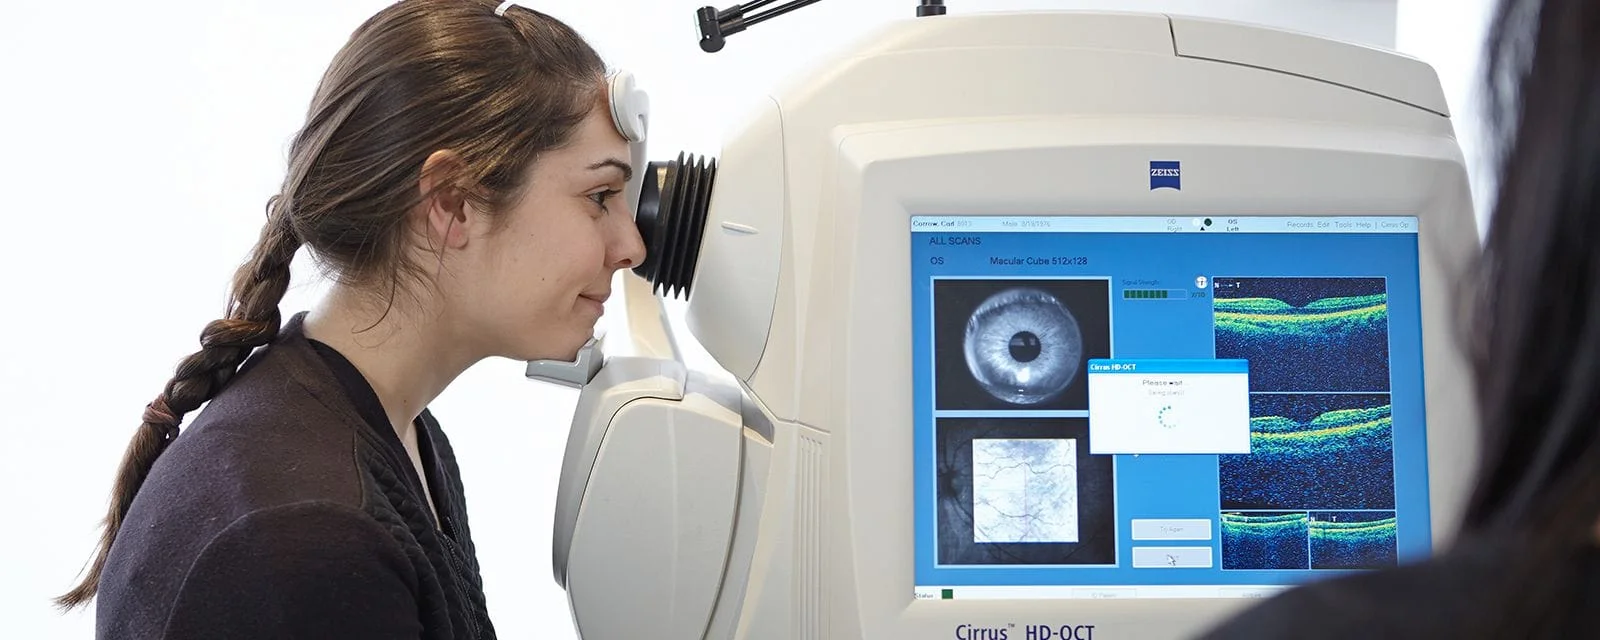 getting eye checked for glaucoma